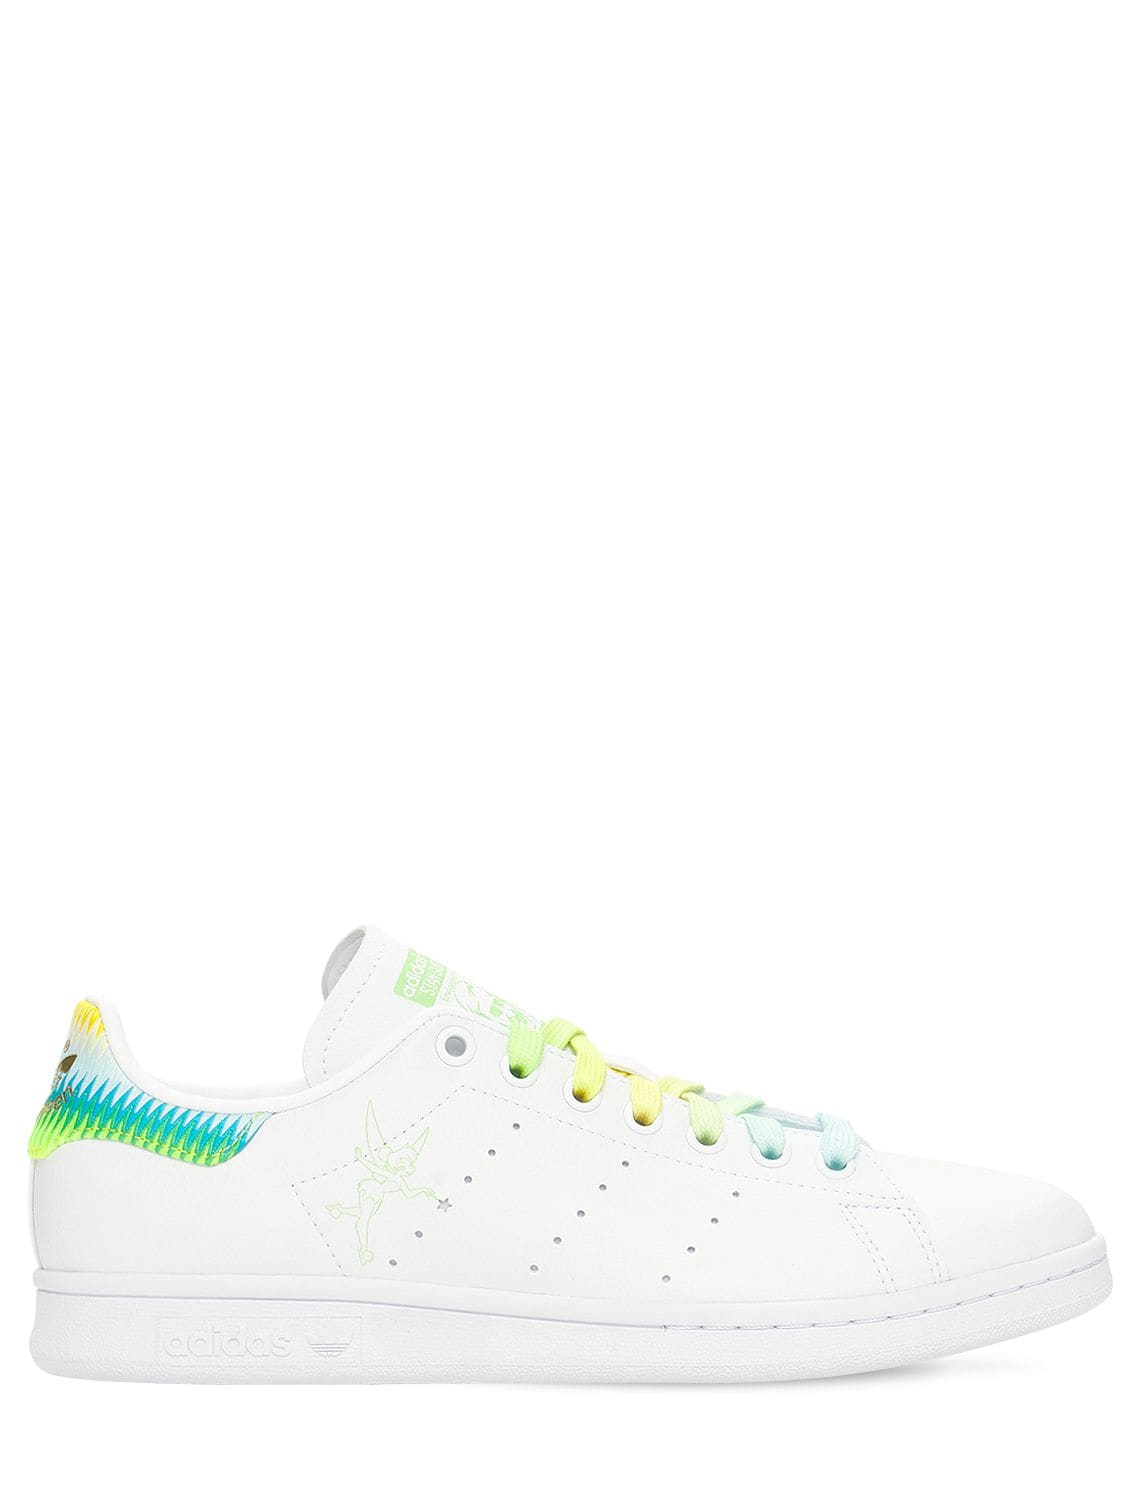 Buy Tinkerbell Stan Smith Sneakers for Womens at Goxip رفرف